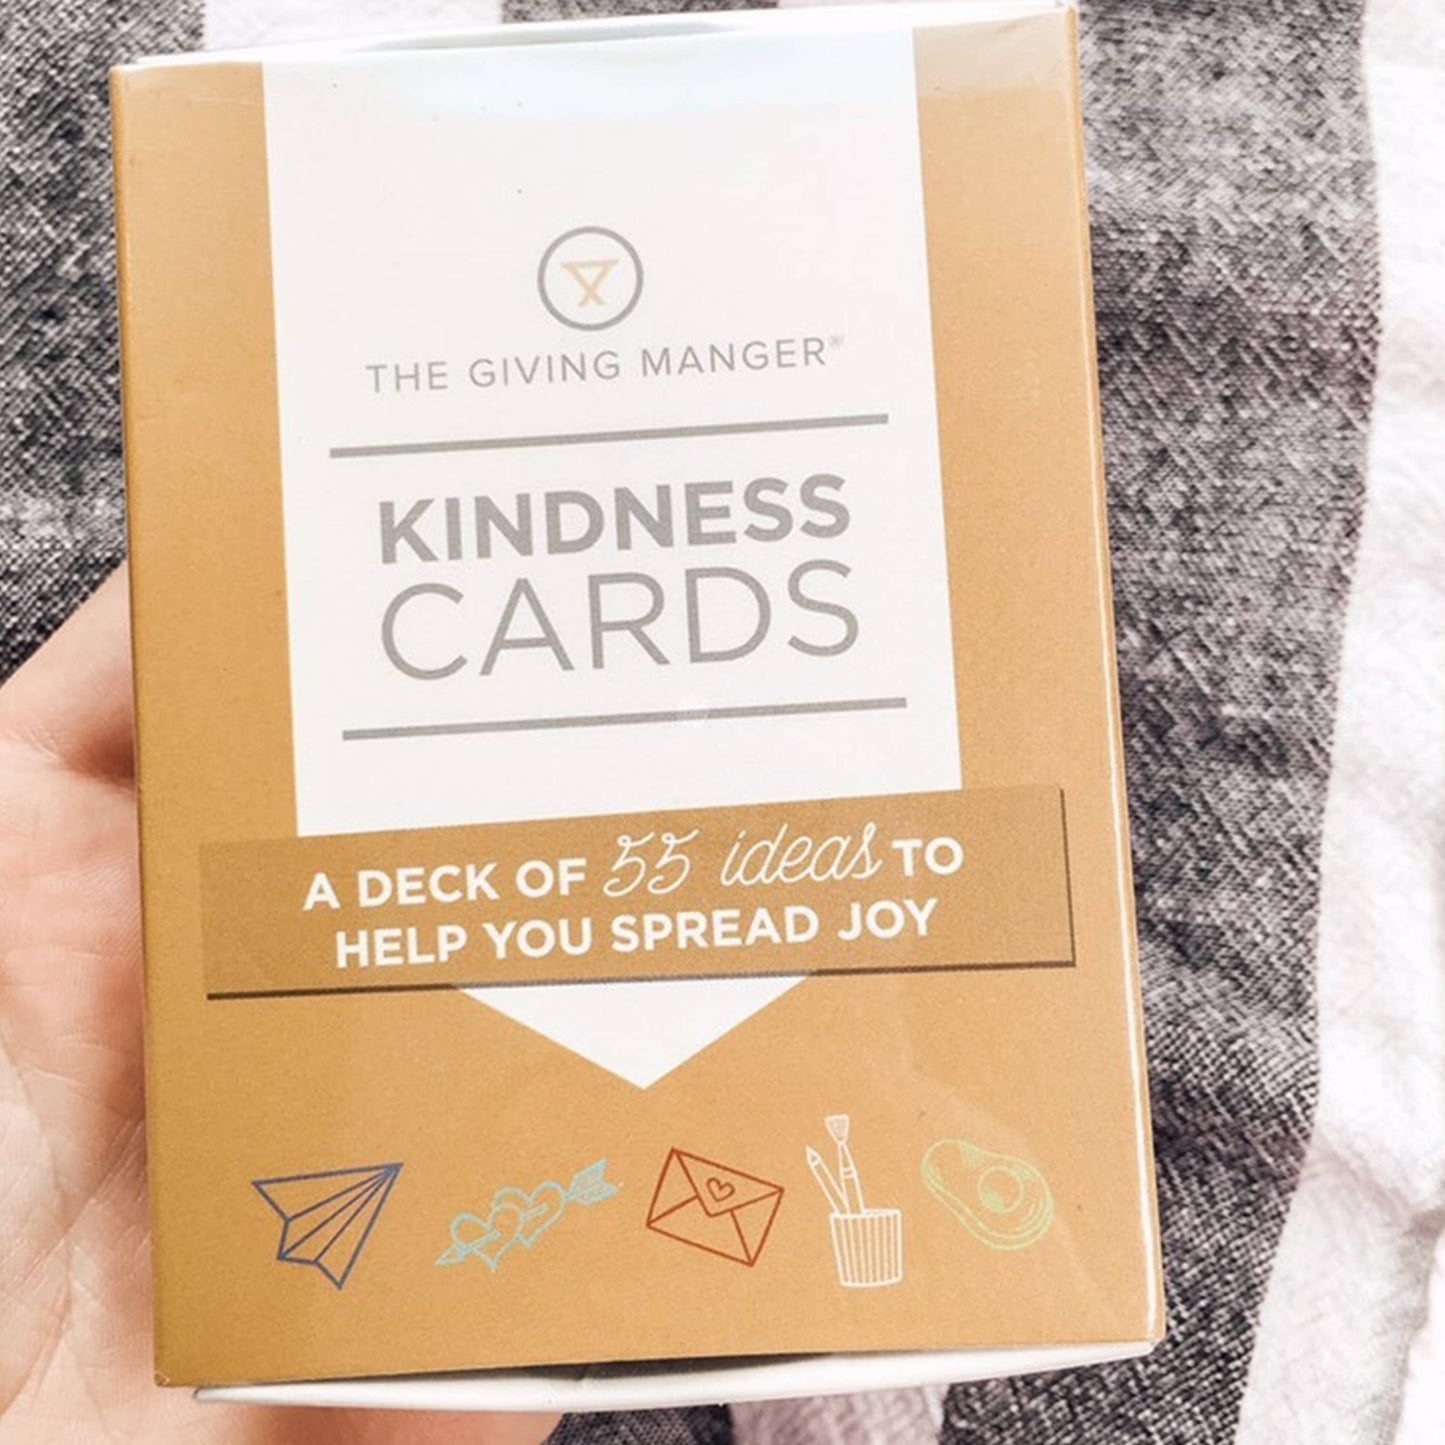 Kindness Cards - A deck of 55 cards of ideas to spread joy!